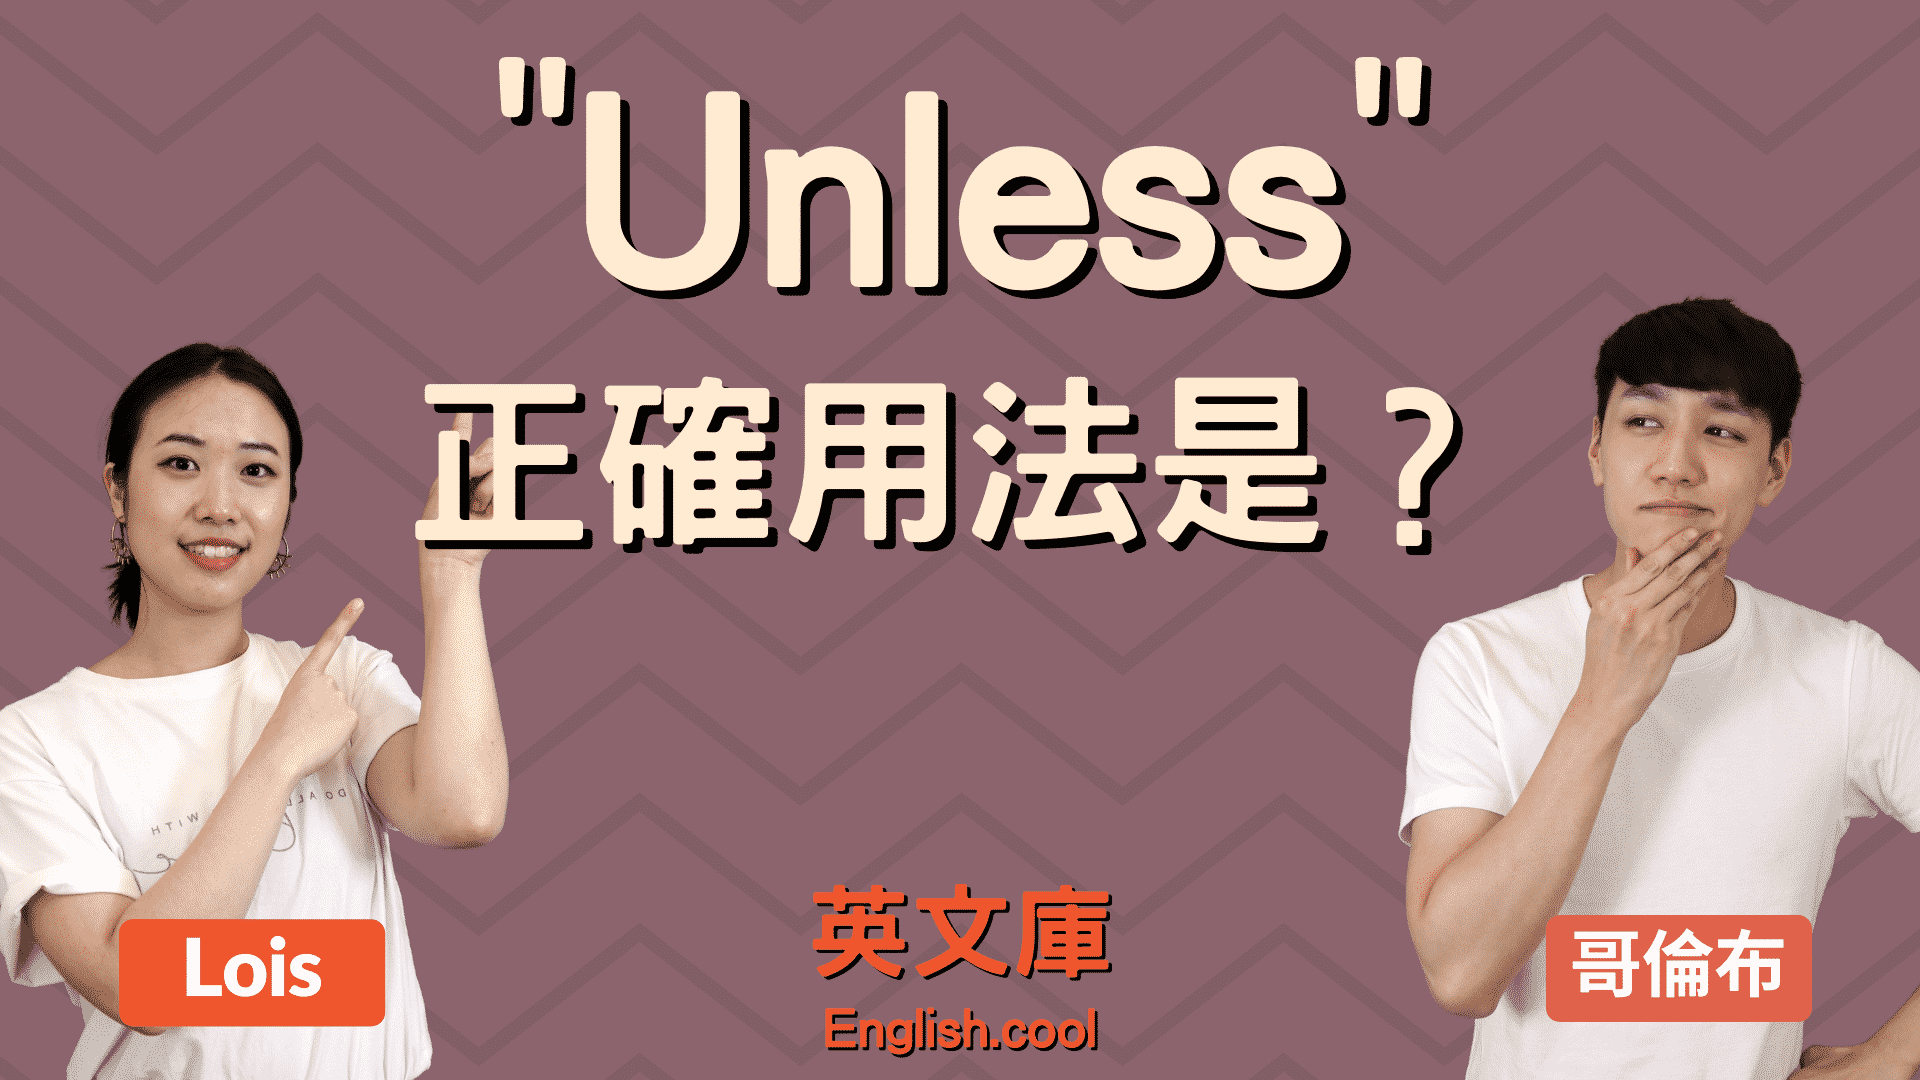 You are currently viewing 「Unless」正確用法是？ 可以用在疑問句嗎？來看例句一次搞懂！